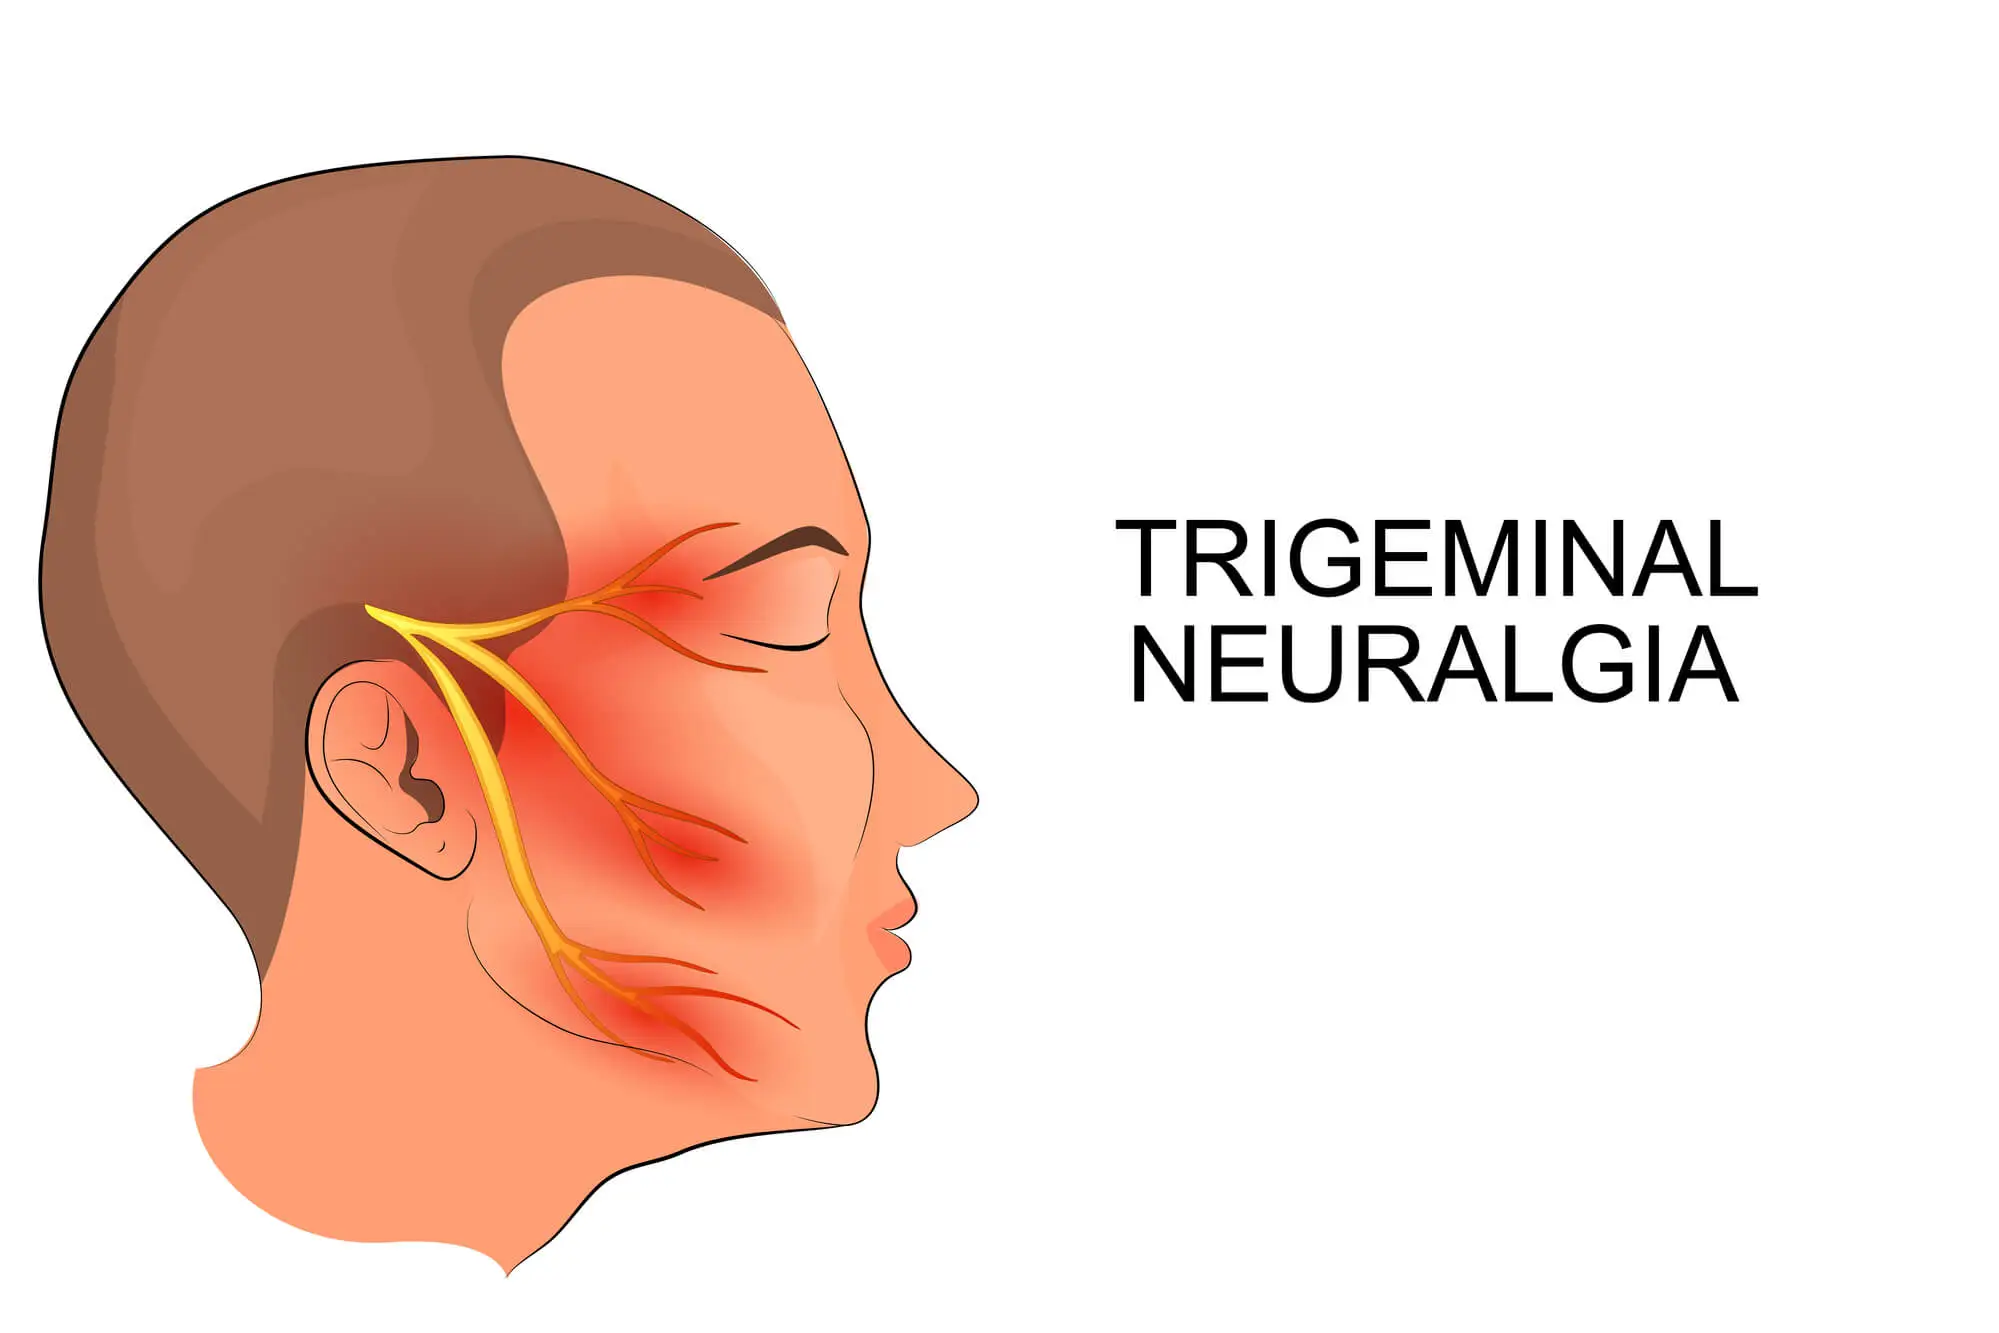 Affected areas on side of face of those suffering from trigeminal neuralgia